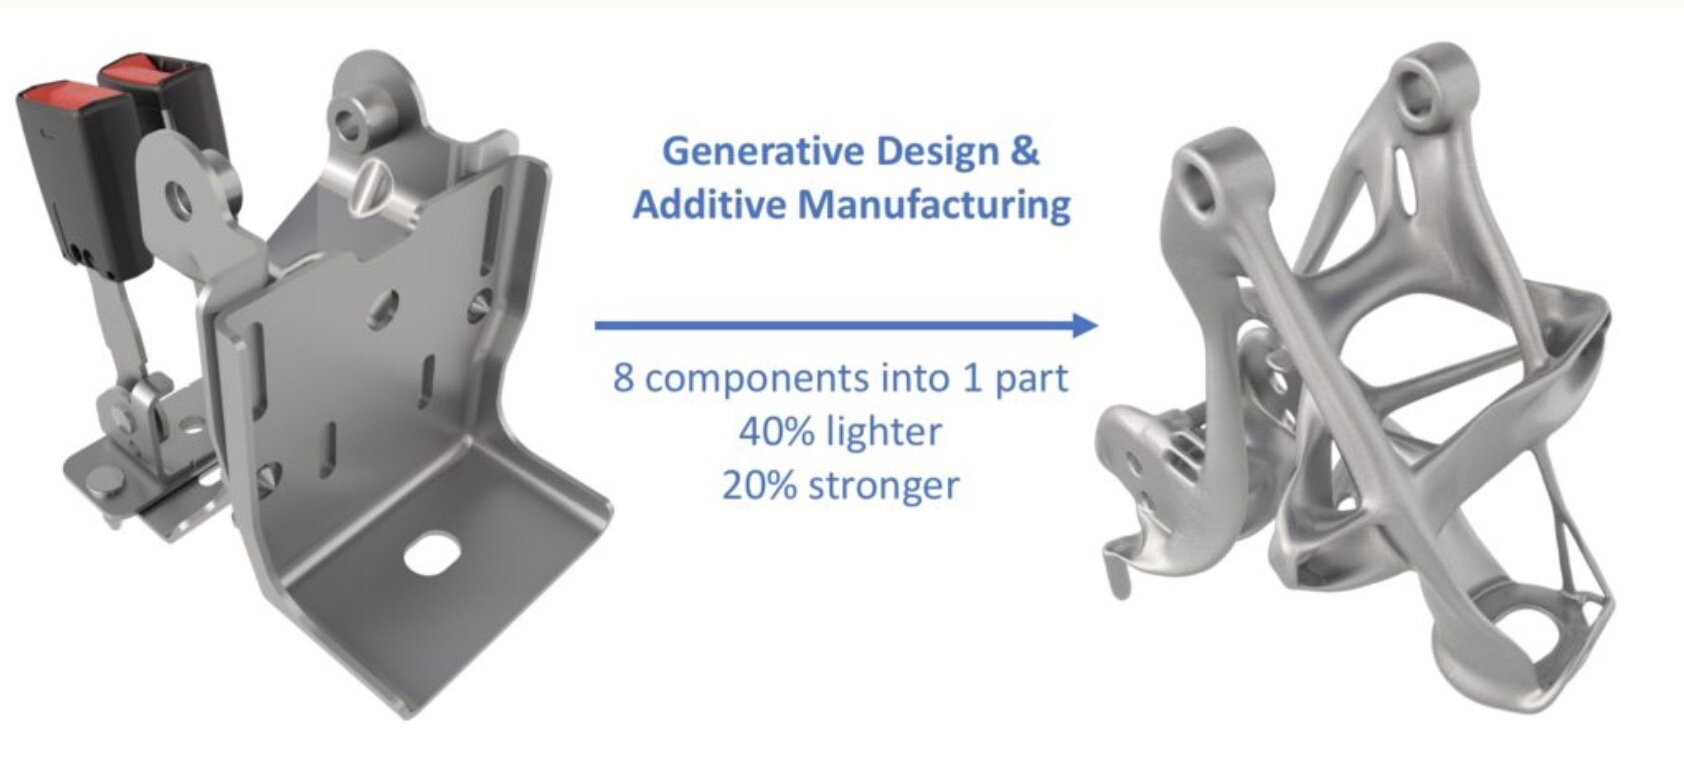 GM collaborated with AutoDesk’s Generative Design tools to create a seat bracket that was lighter, stronger, and consolidated several pieces into a single 3D-printed component.